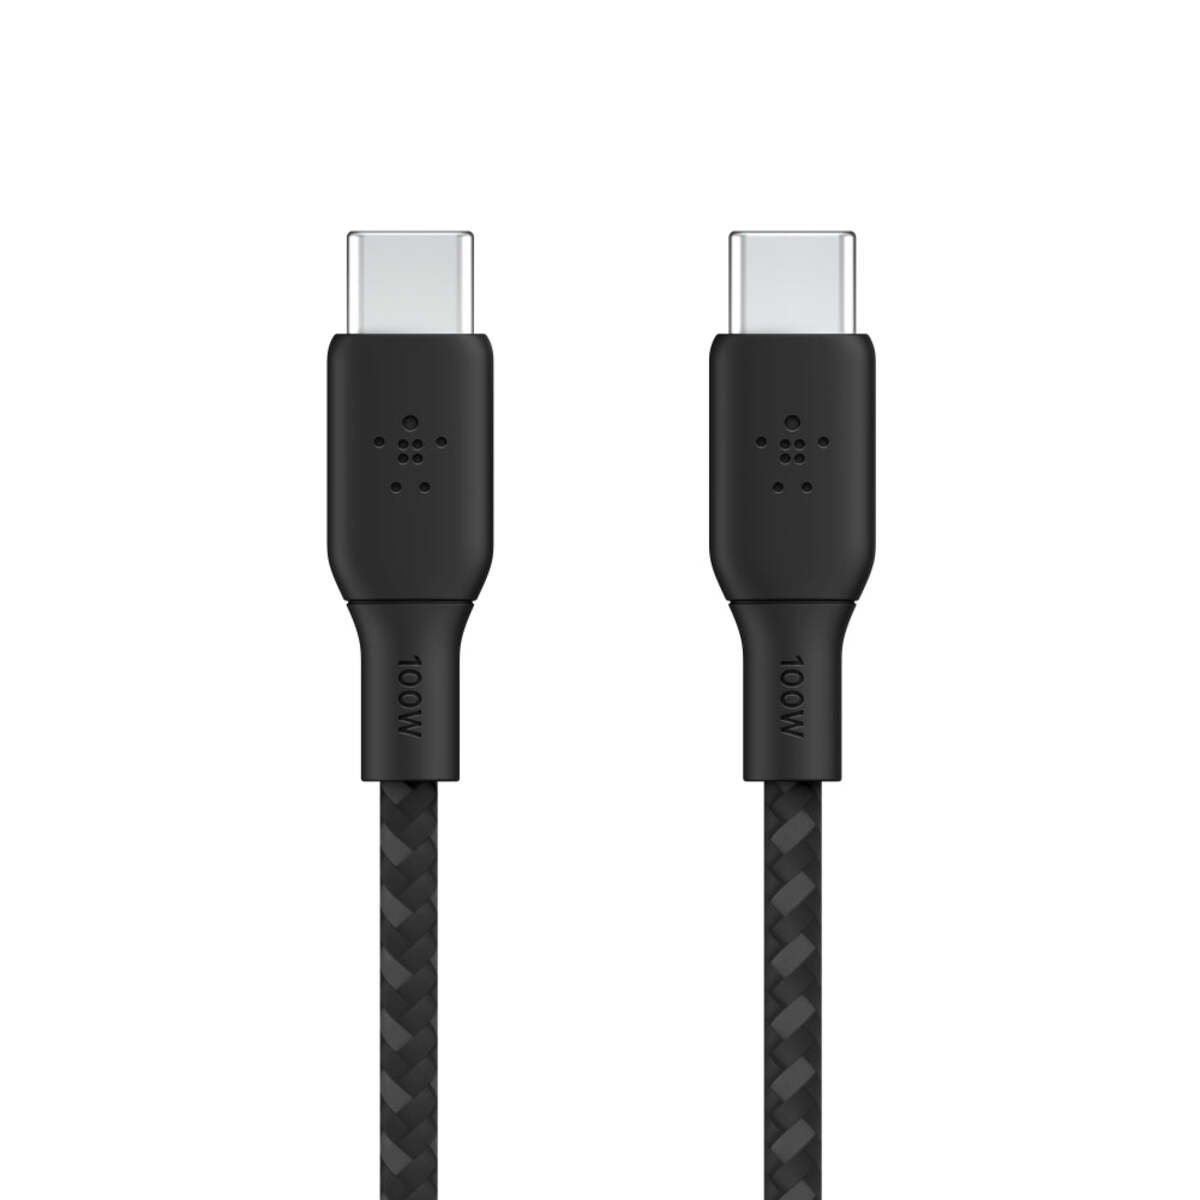 BELKIN Boost Charge USB-C to USB-C Braided Cable 3 Meter - Black